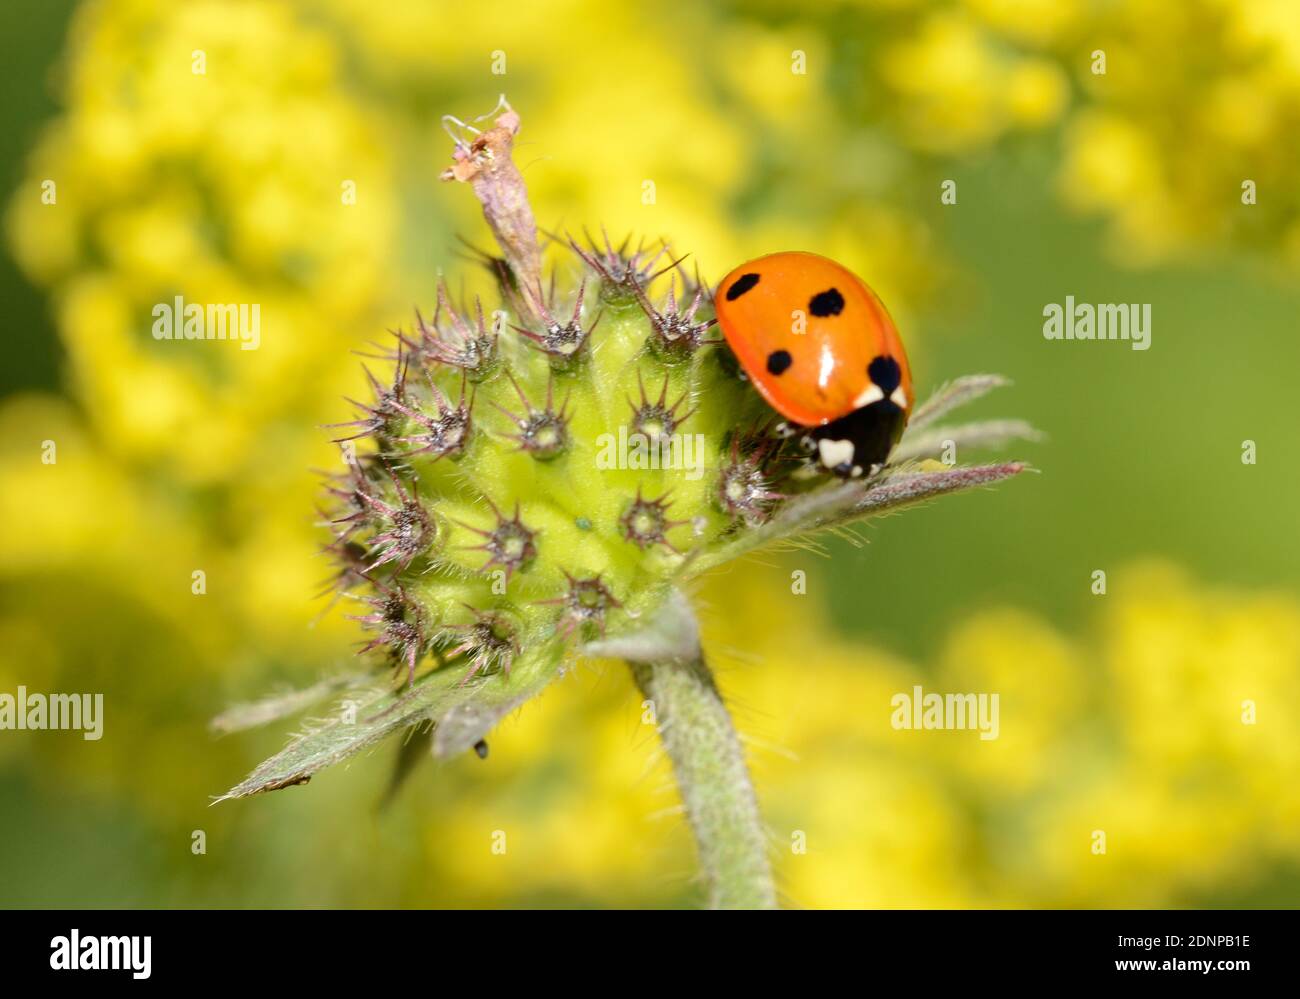 Seven-spot Ladybird aka Seven-spotted ladybug, Coccinella septempunctata, against Background of Out of Focus Yellow Flowers Stock Photo